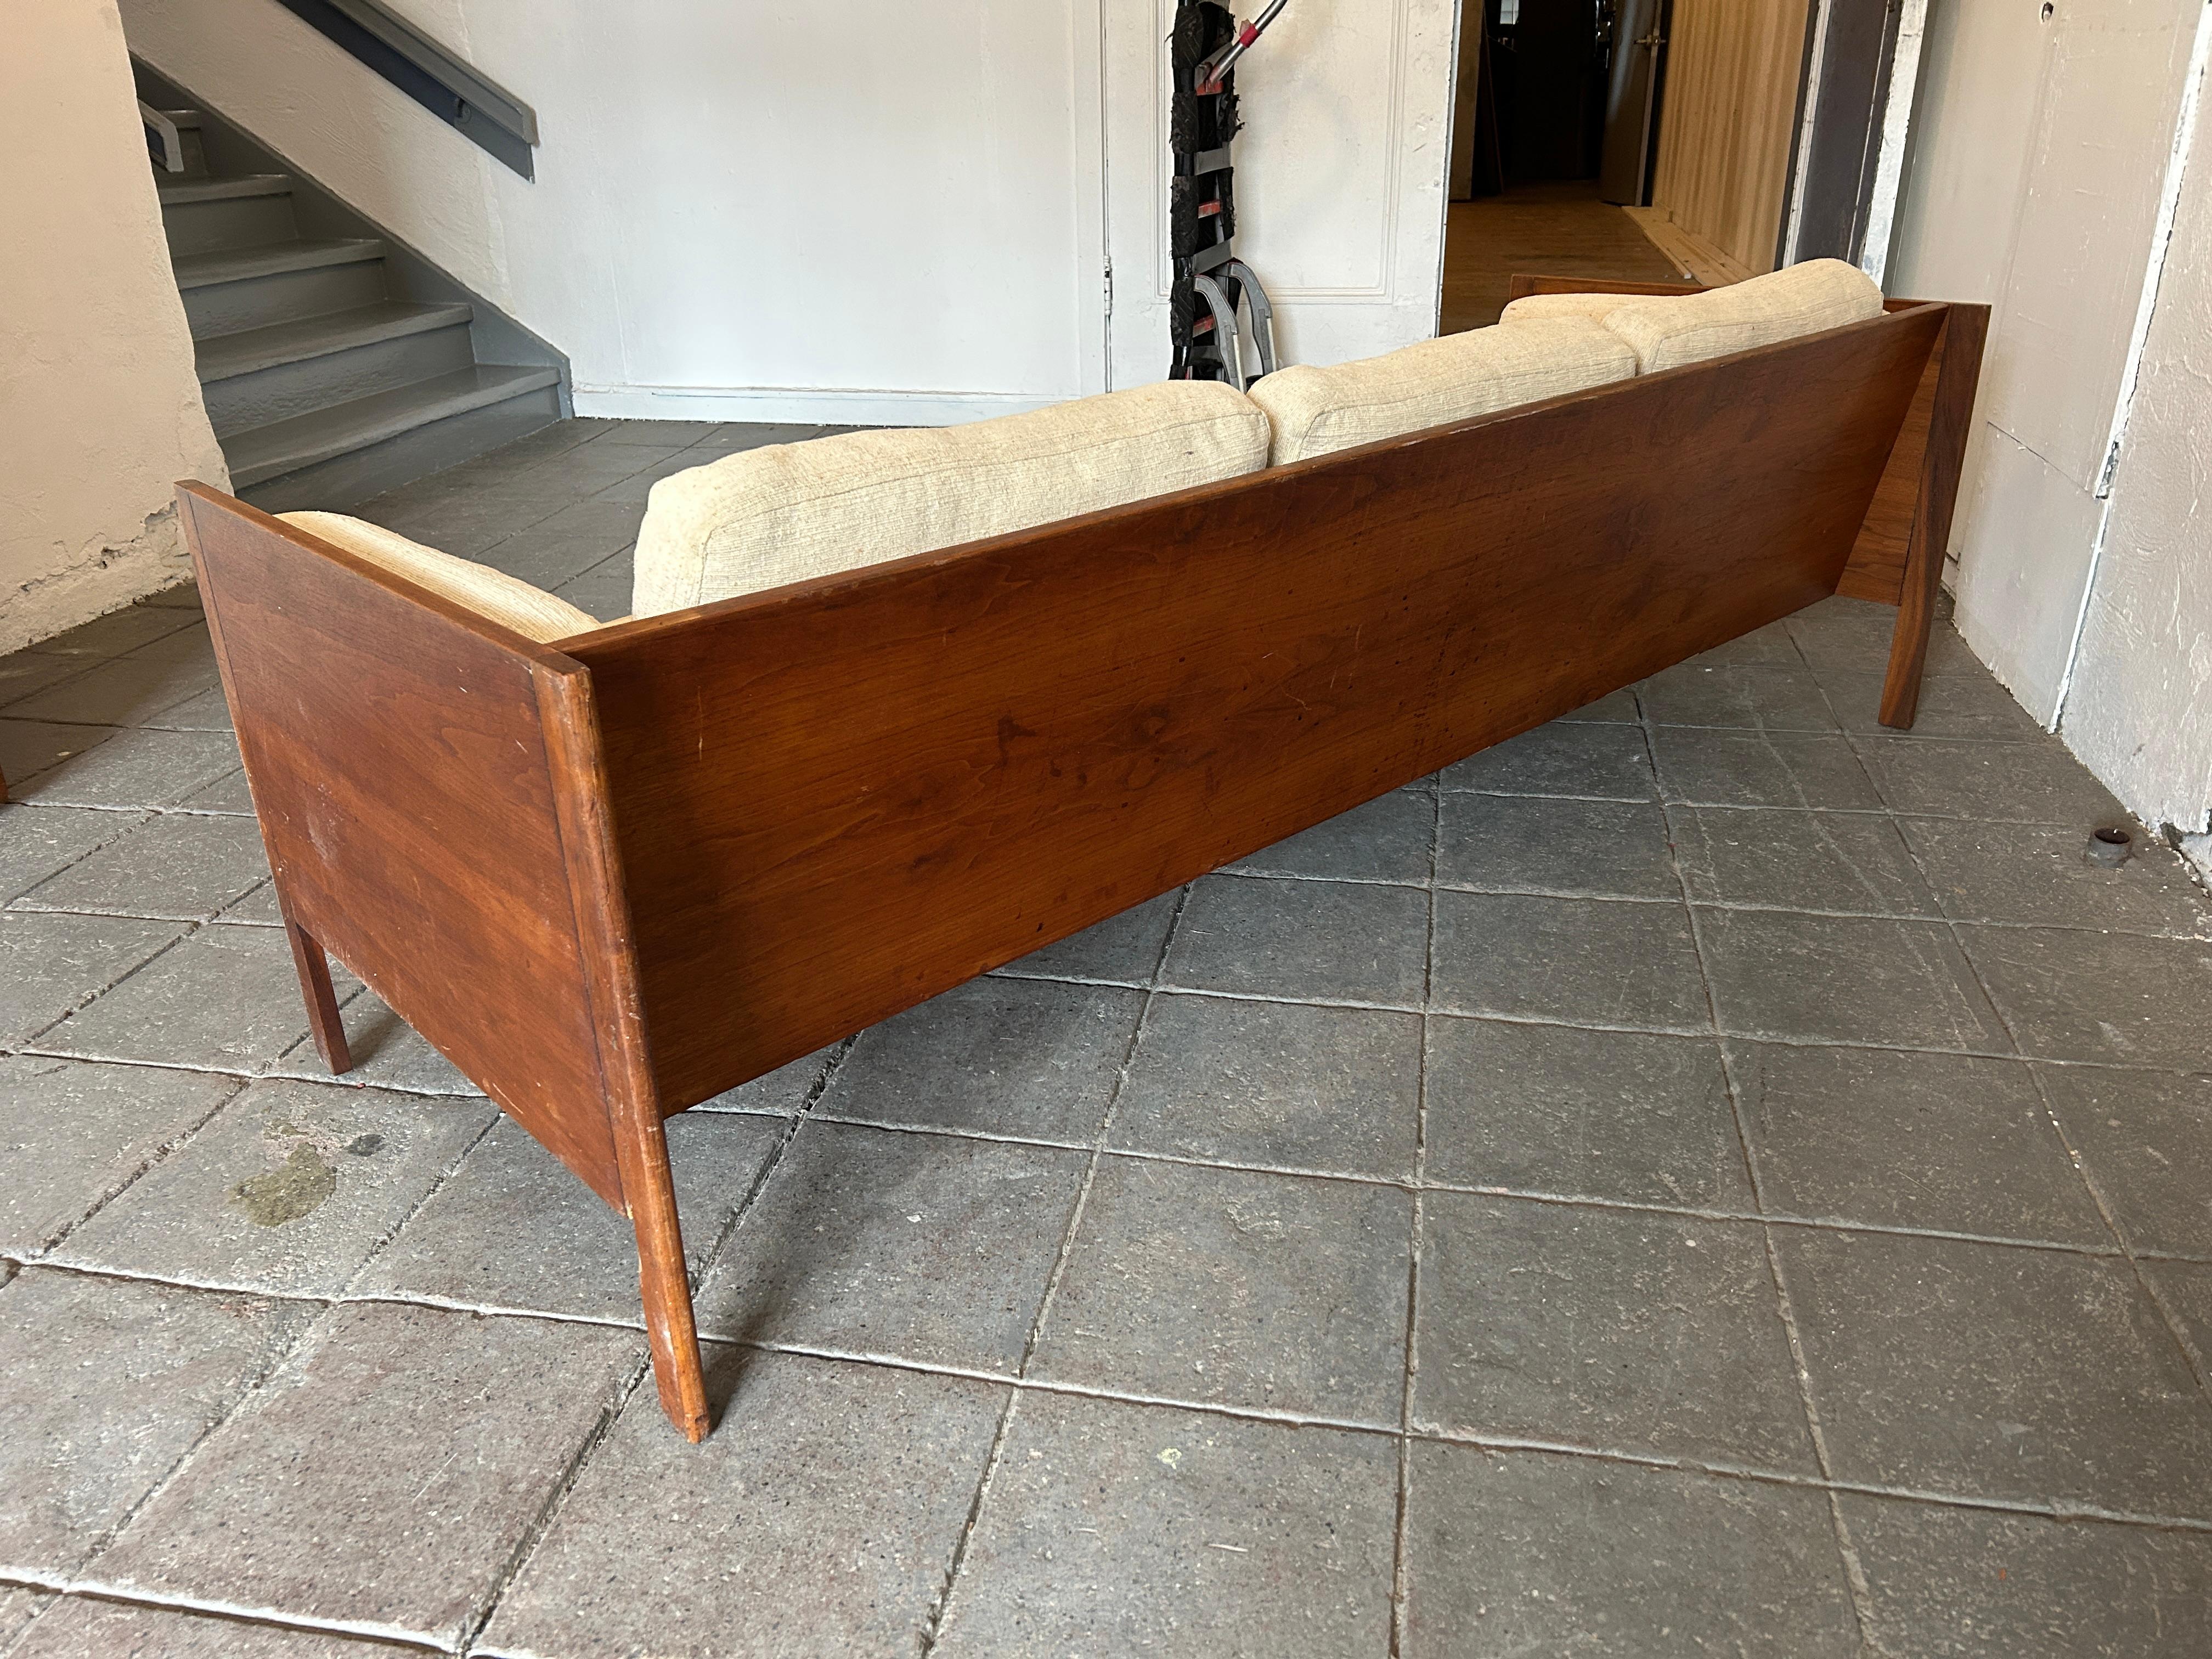 Mid-20th Century Midcentury Walnut 3 Seat Platform Armed Sofa Daybed by Richard Artschwager For Sale